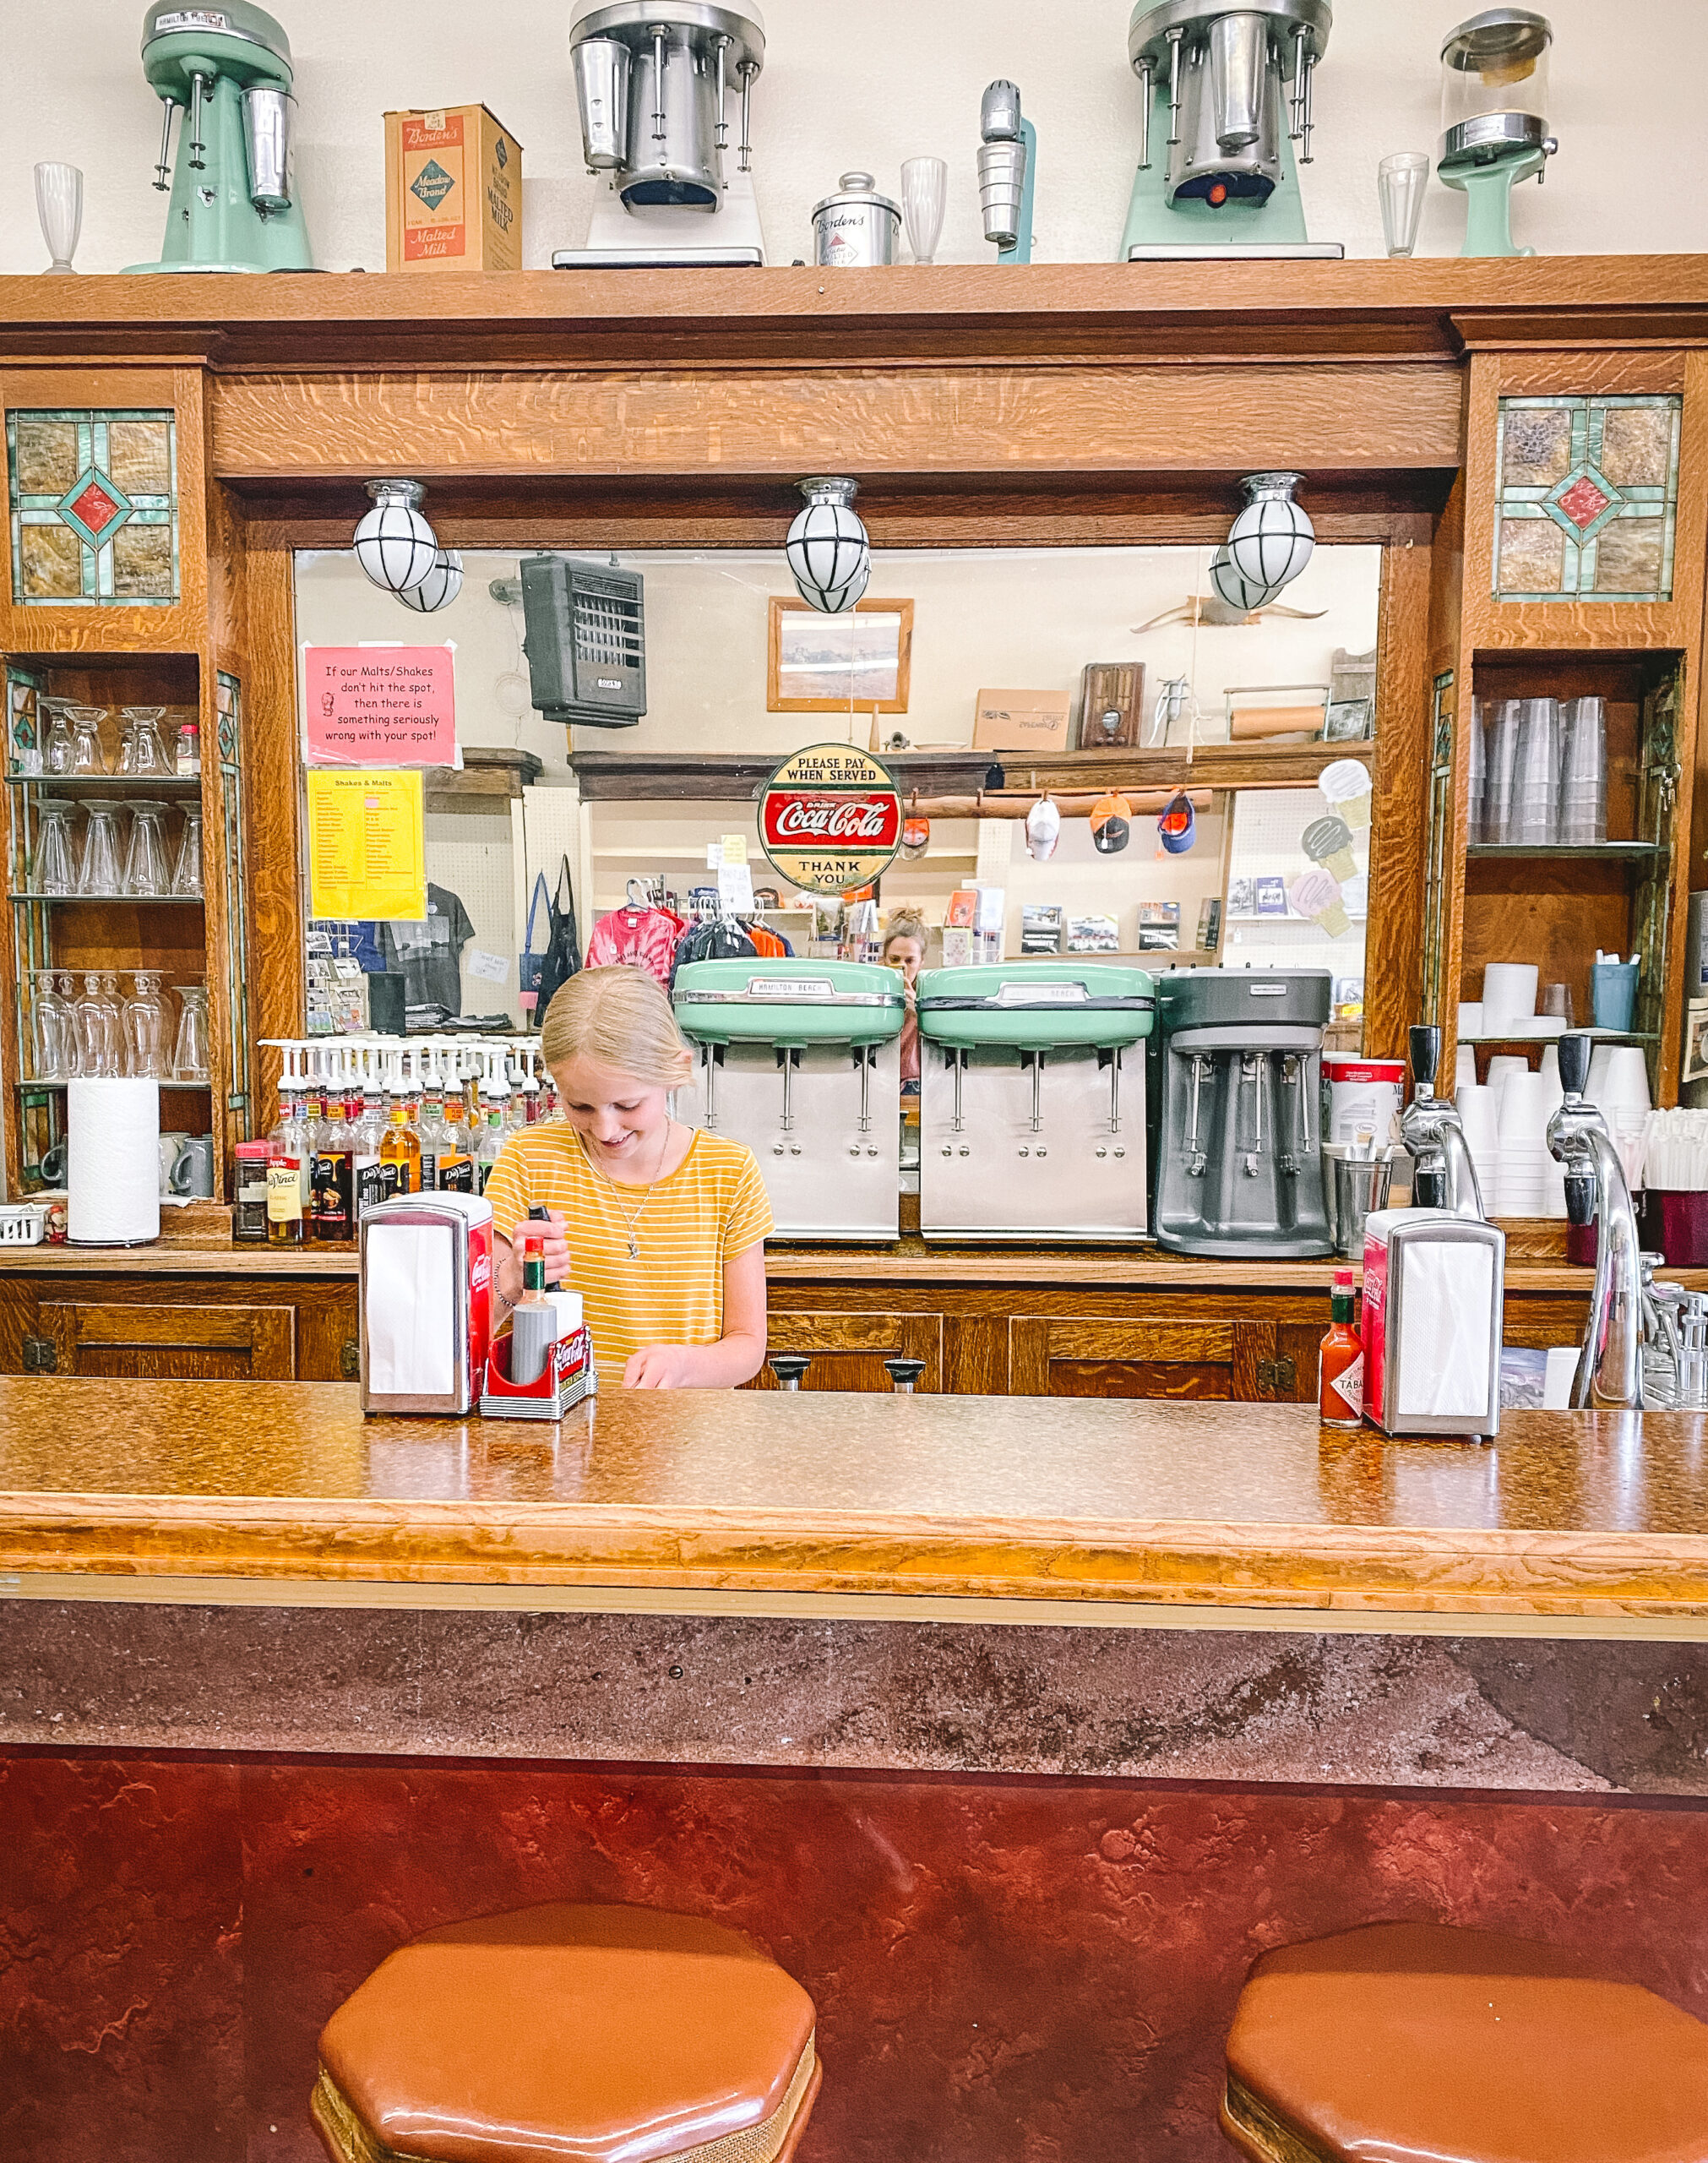 Why We're Selling the Soda Fountain